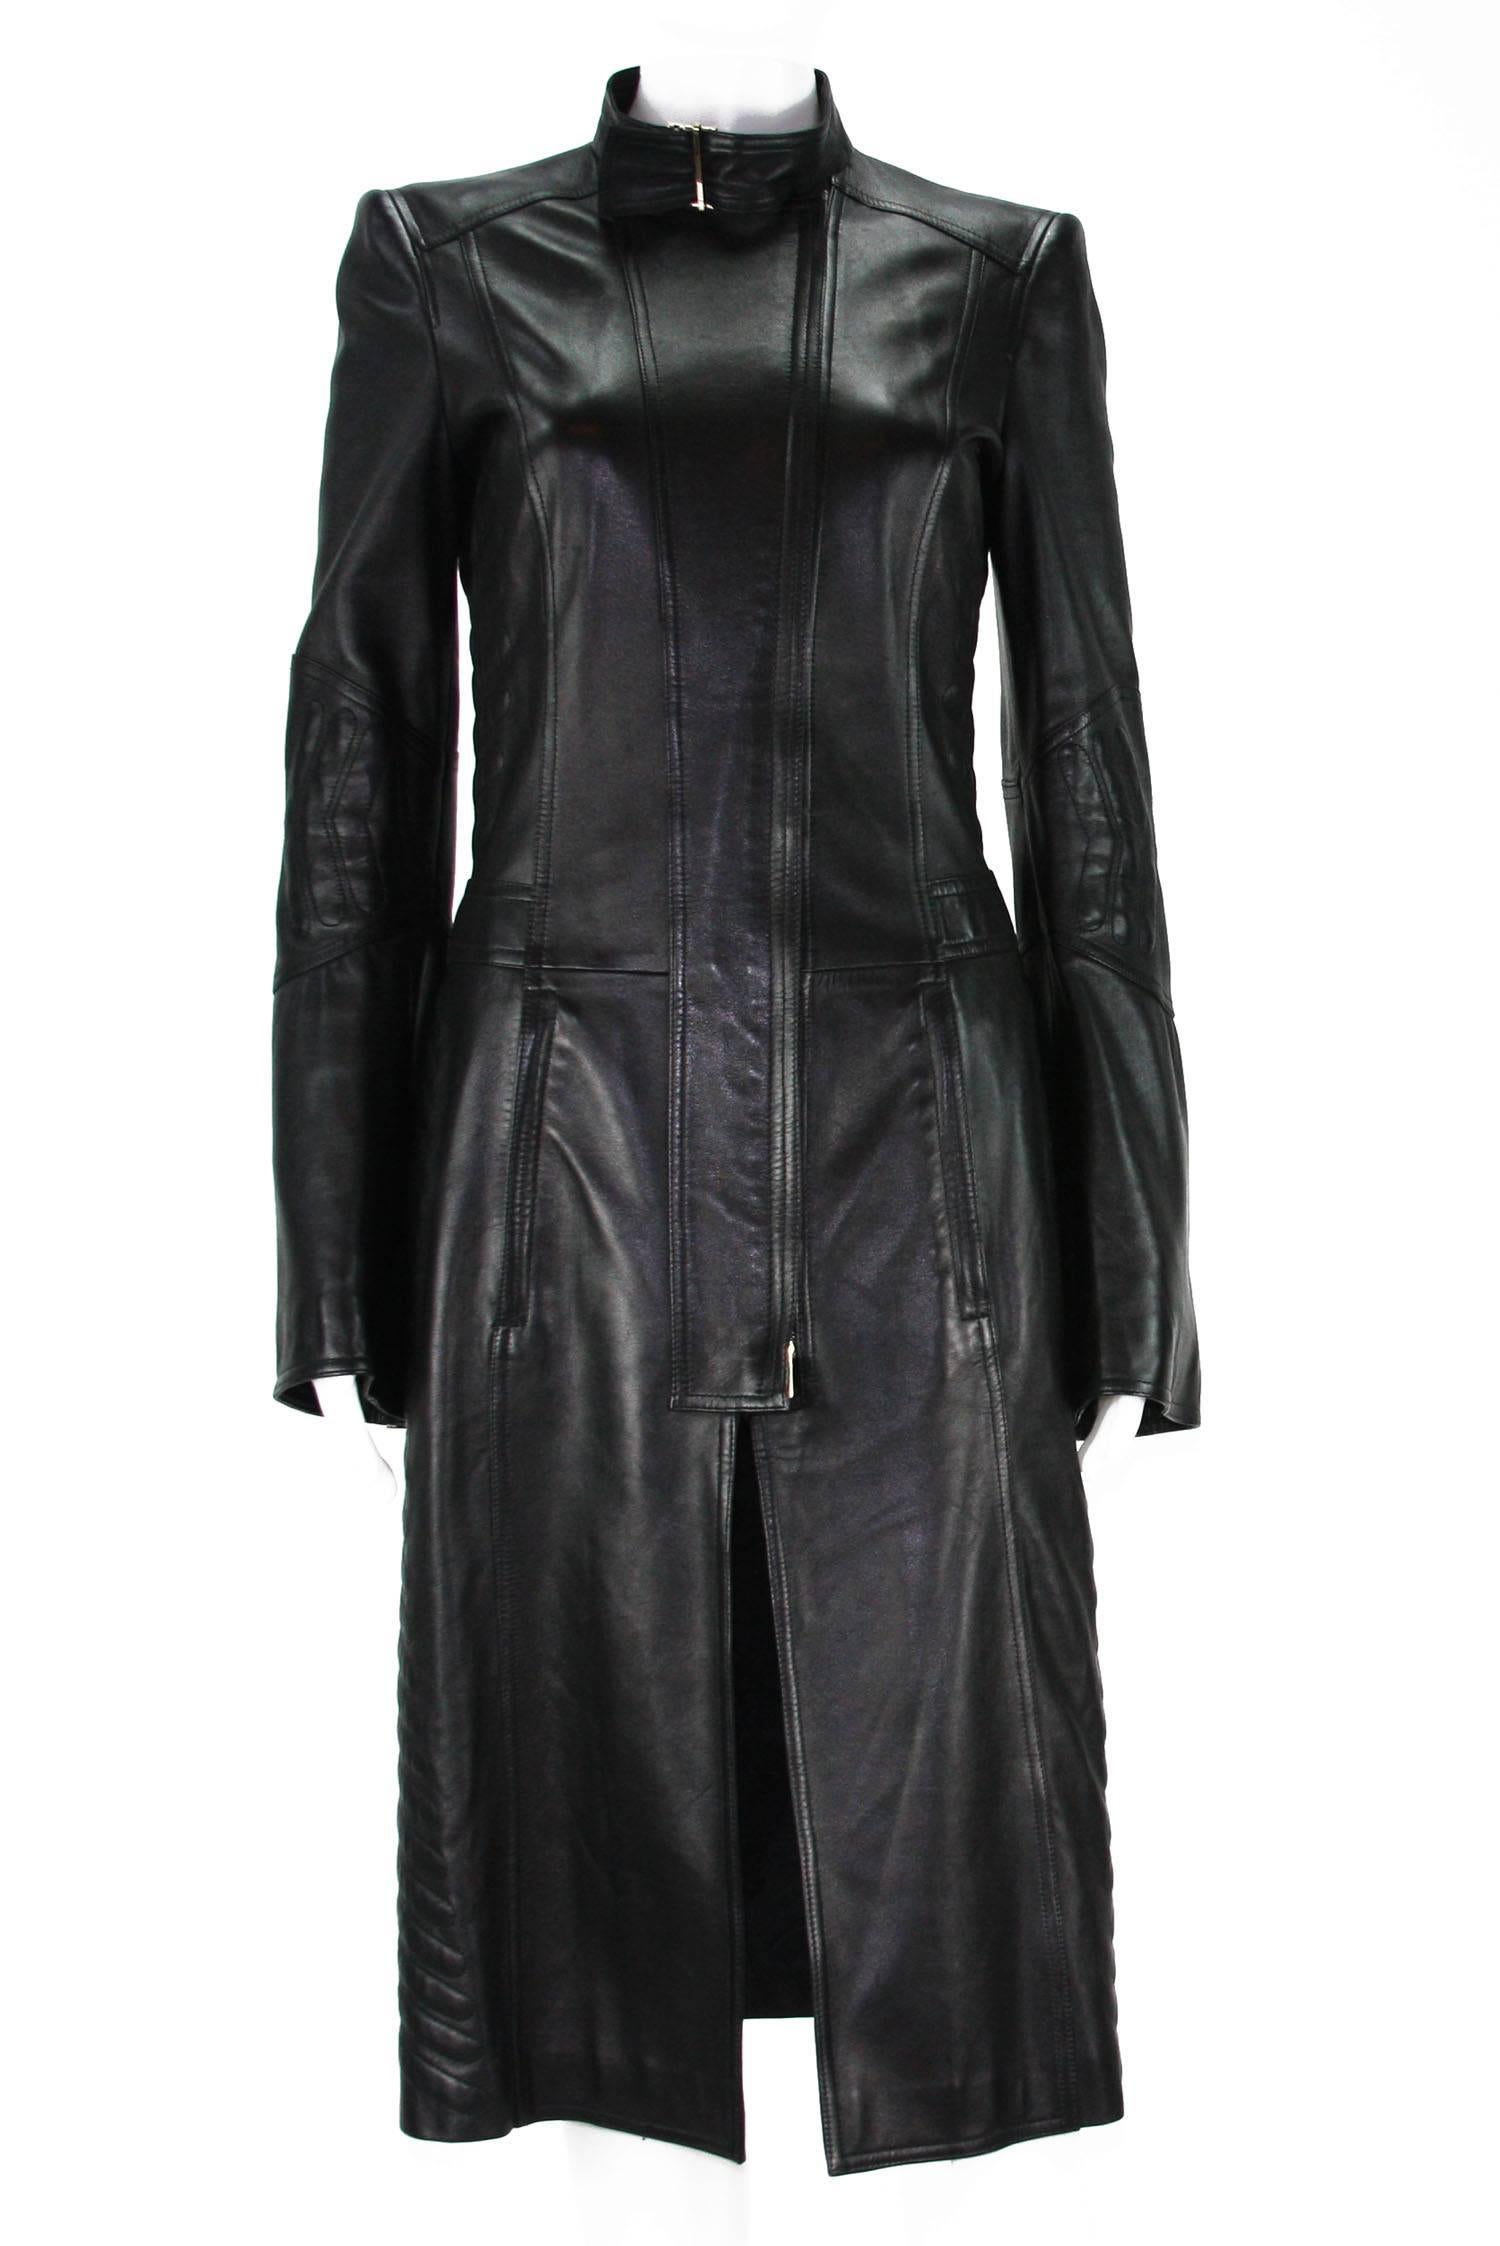 F/W 2004 Tom Ford for Gucci Chevron Quilting Black Soft Leather Coat It ...